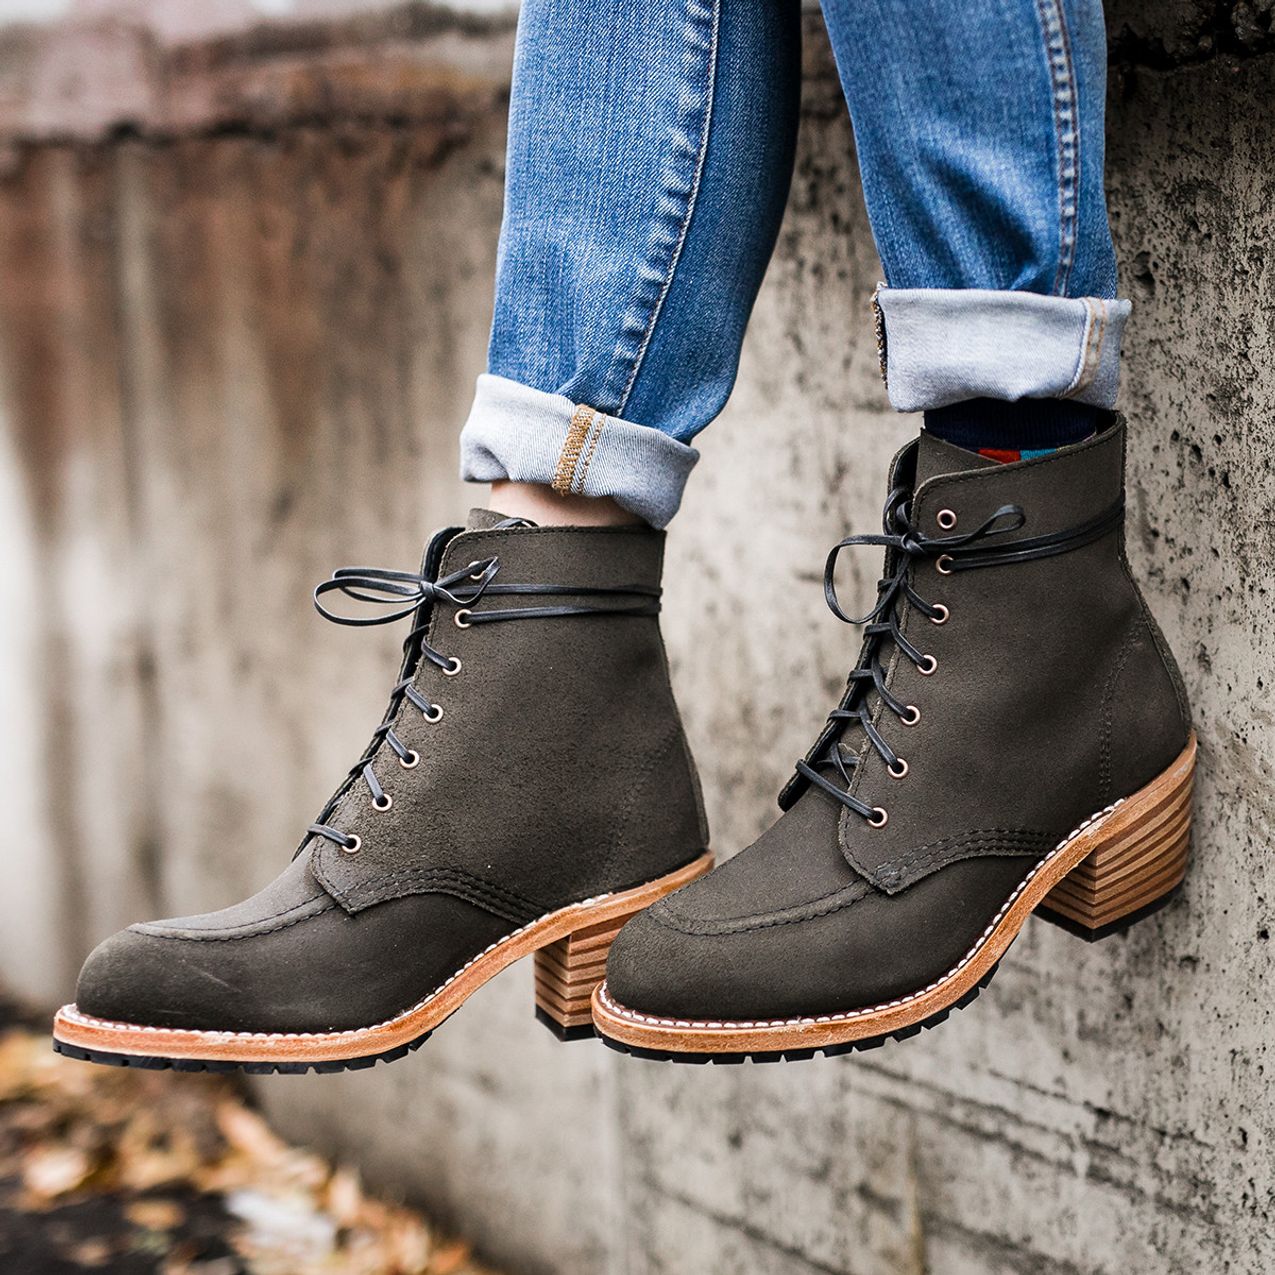 mens work boots on sale near me